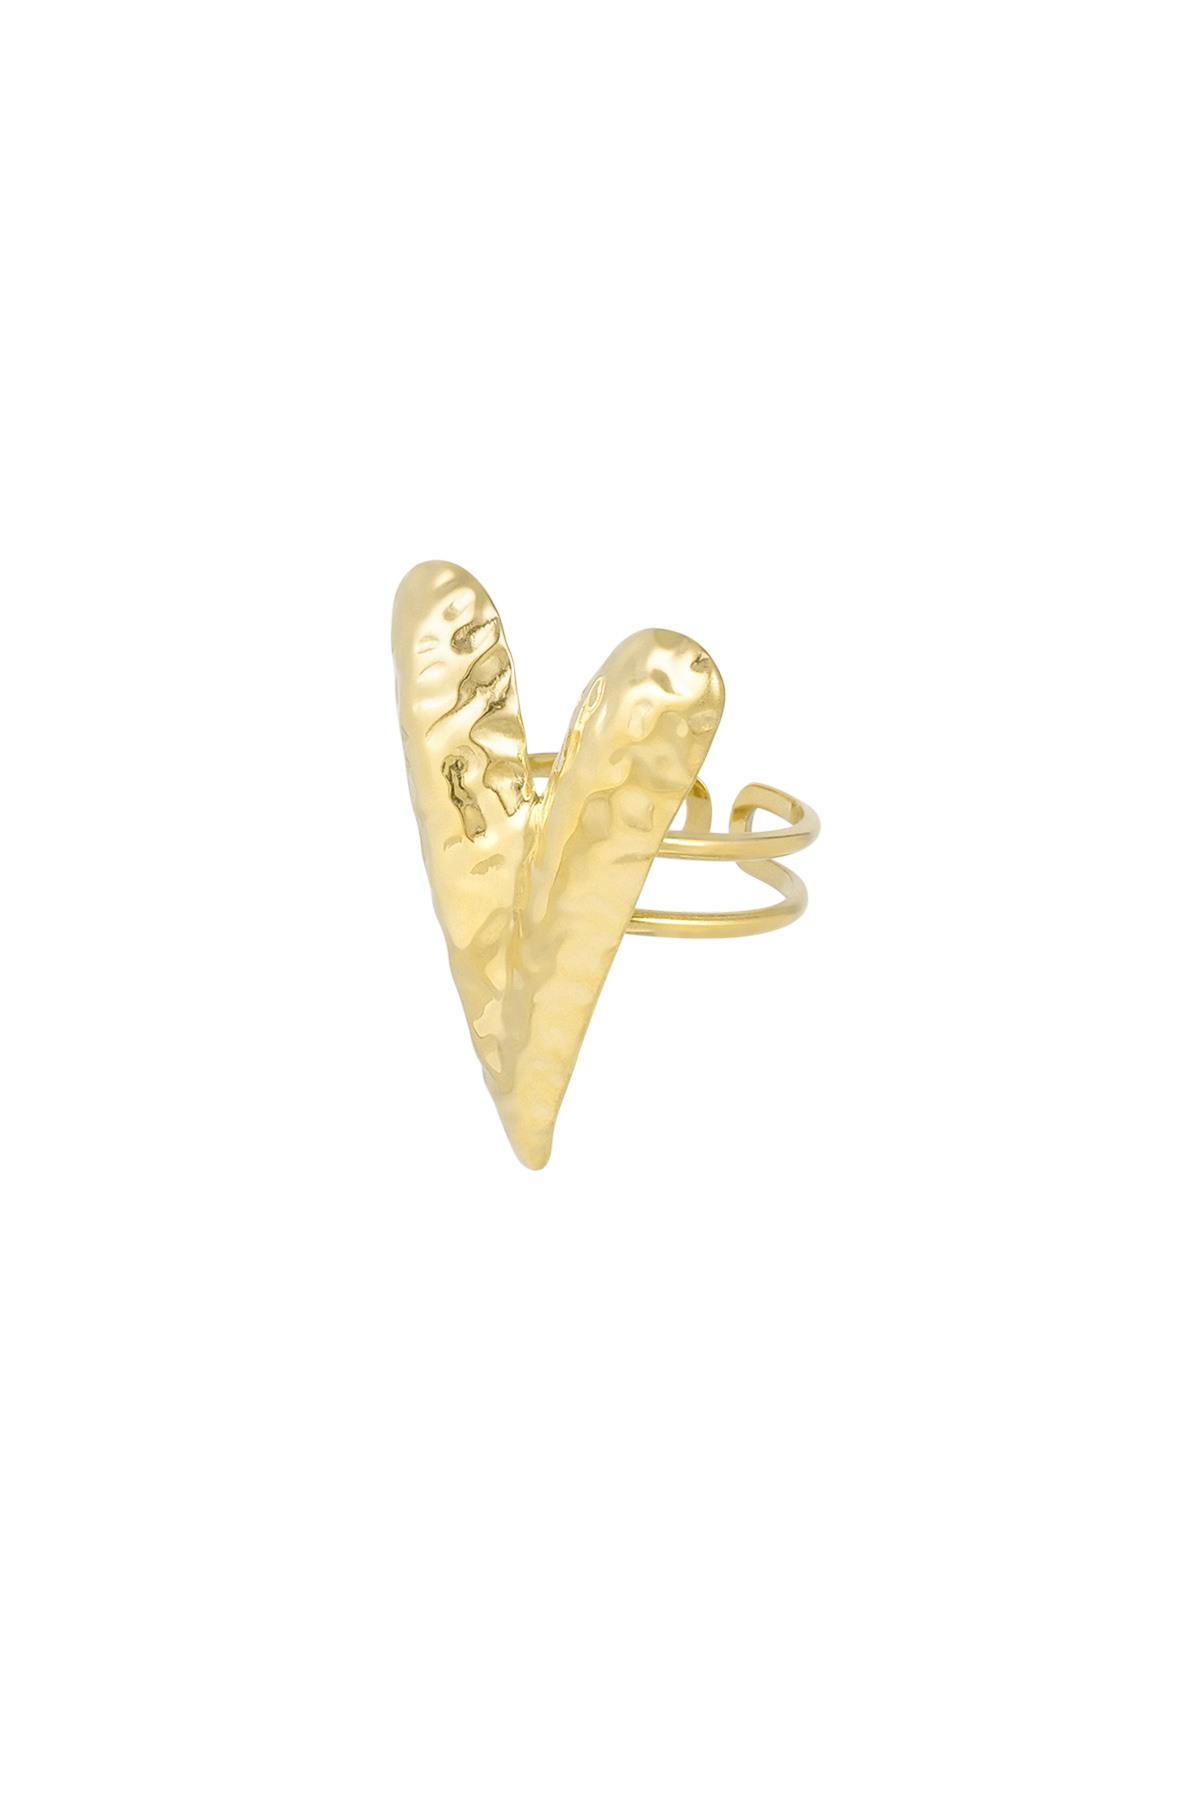 Structured love ring - gold  h5 